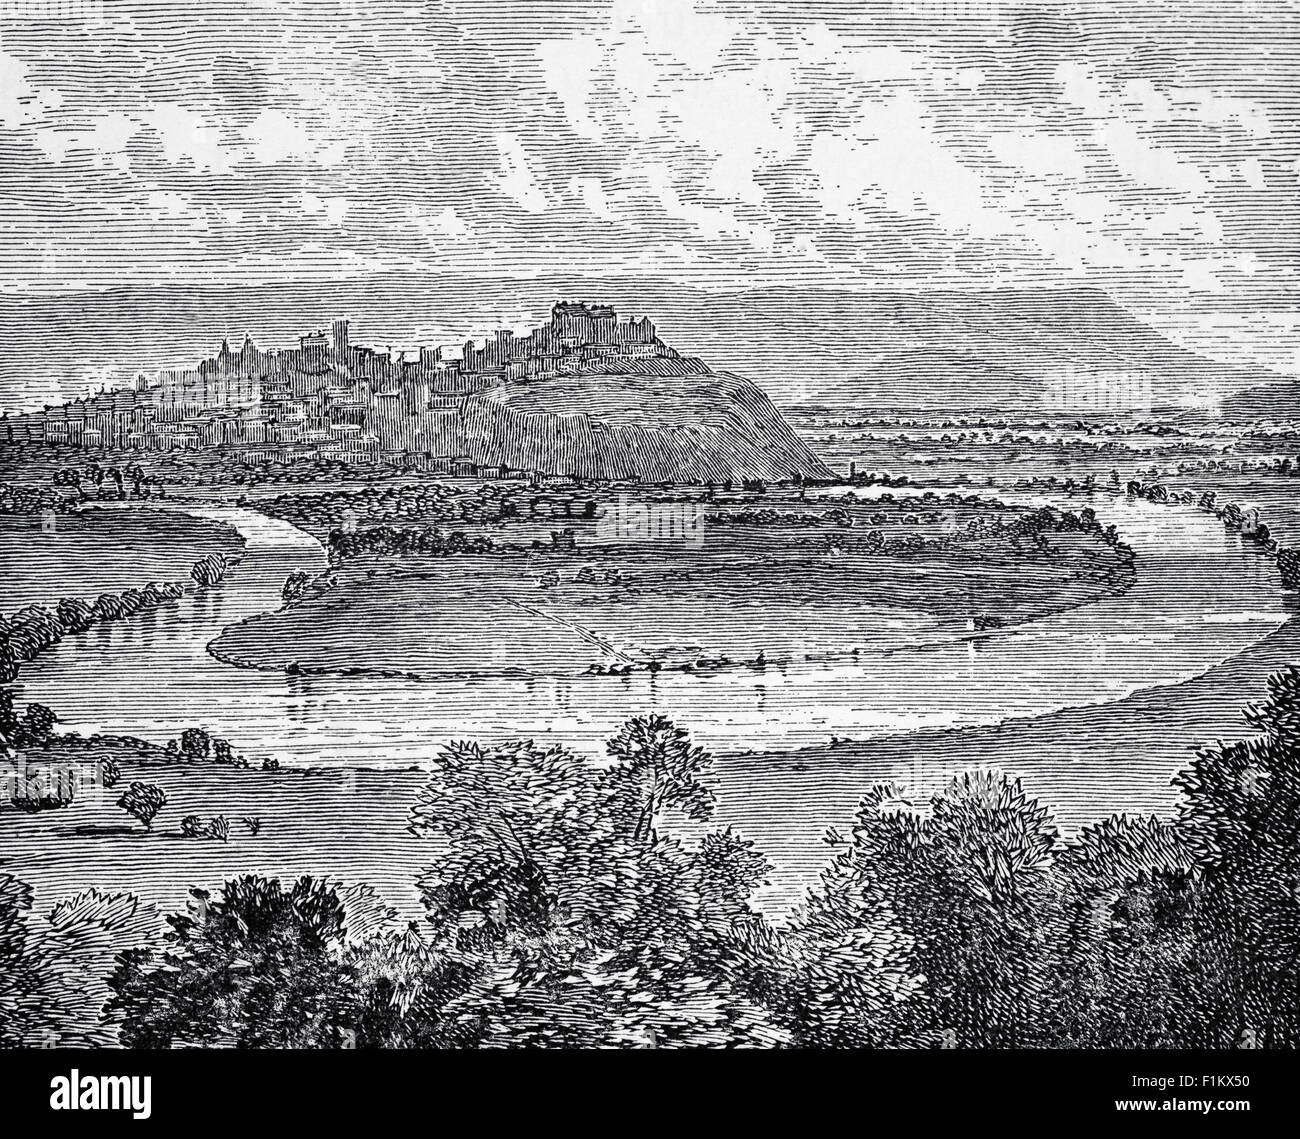 19th Century view of  Stirling, a city in central Scotland. The market town, surrounded by rich farmland, grew up connecting the royal citadel, the medieval old town with its merchants and tradesmen. The Old Bridge and the port located on the River Forth, made it strategically important as the 'Gateway to the Highlands'. Stock Photo